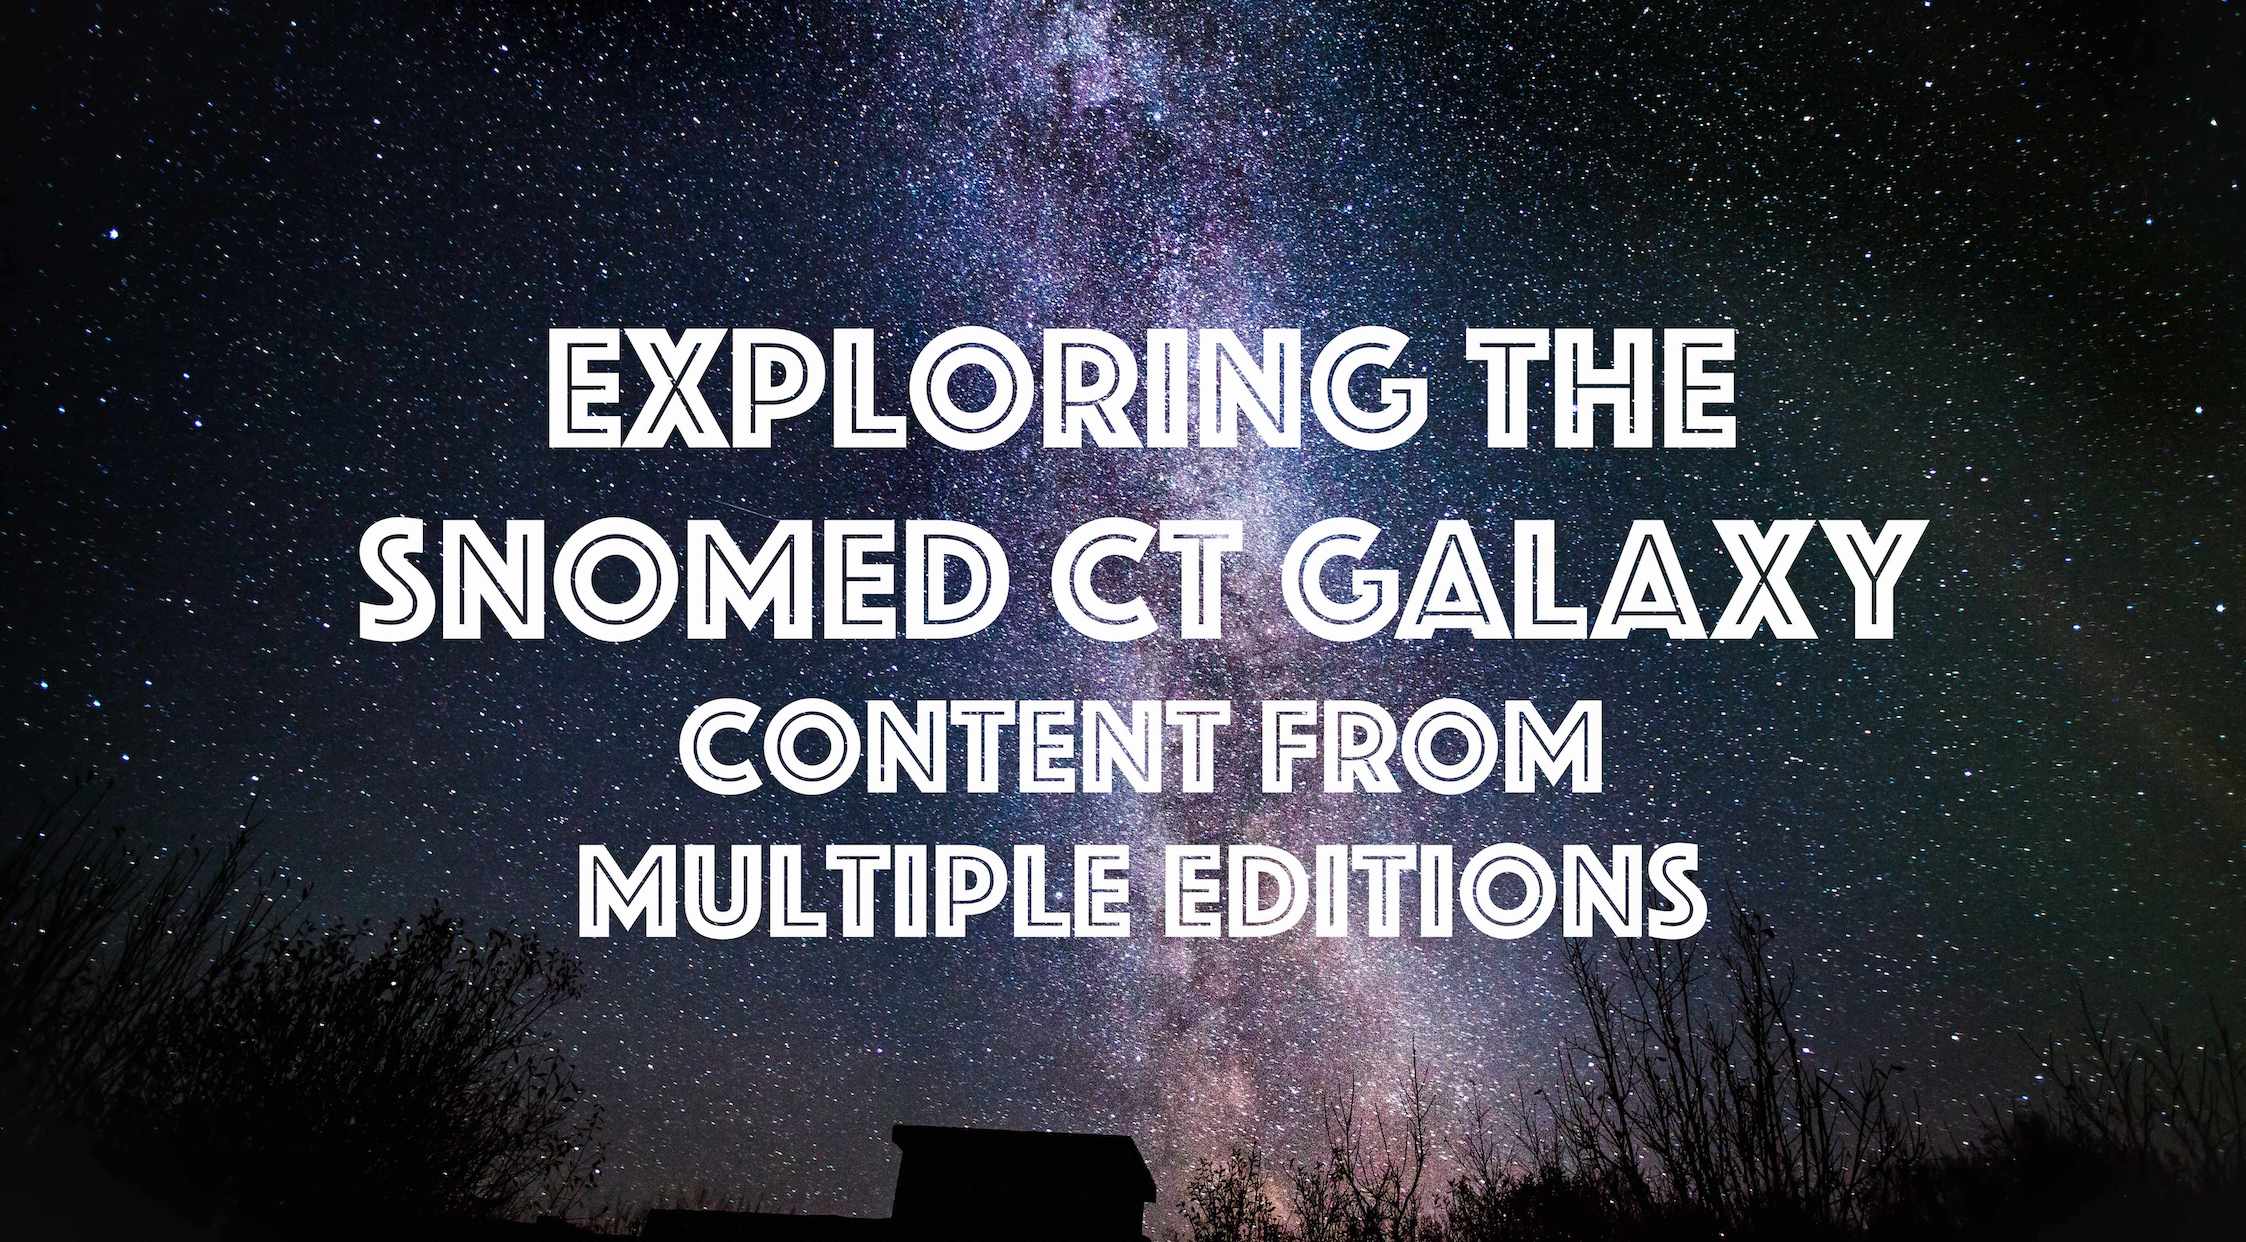 What’s in the SNOMED CT Galaxy? Exploring Content from different editions